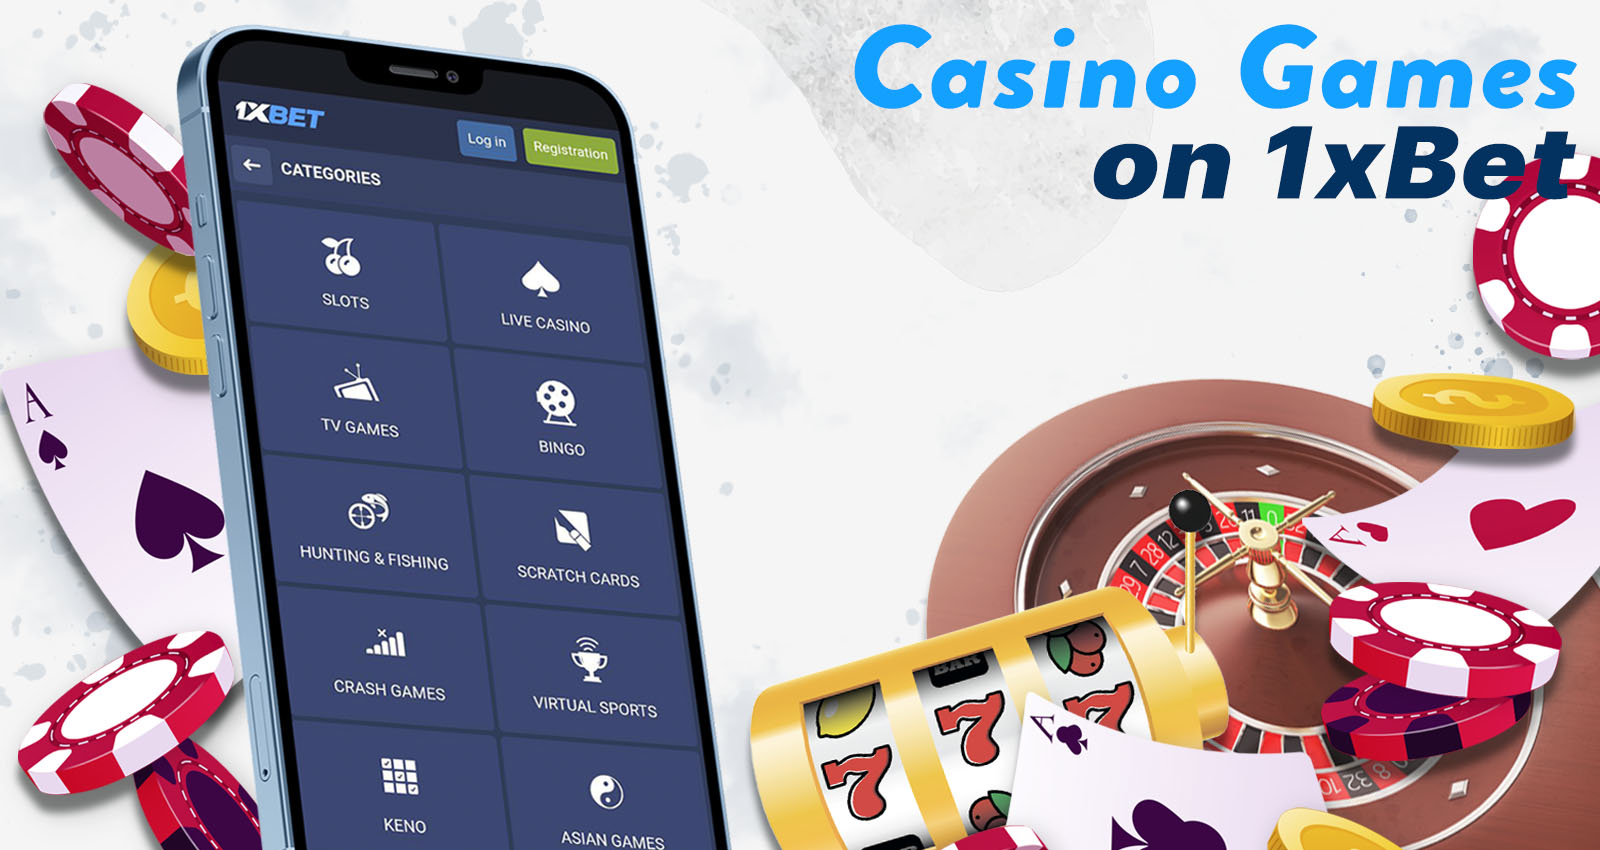 A wide range of 1xBet casino games to suit all tastes and preferences